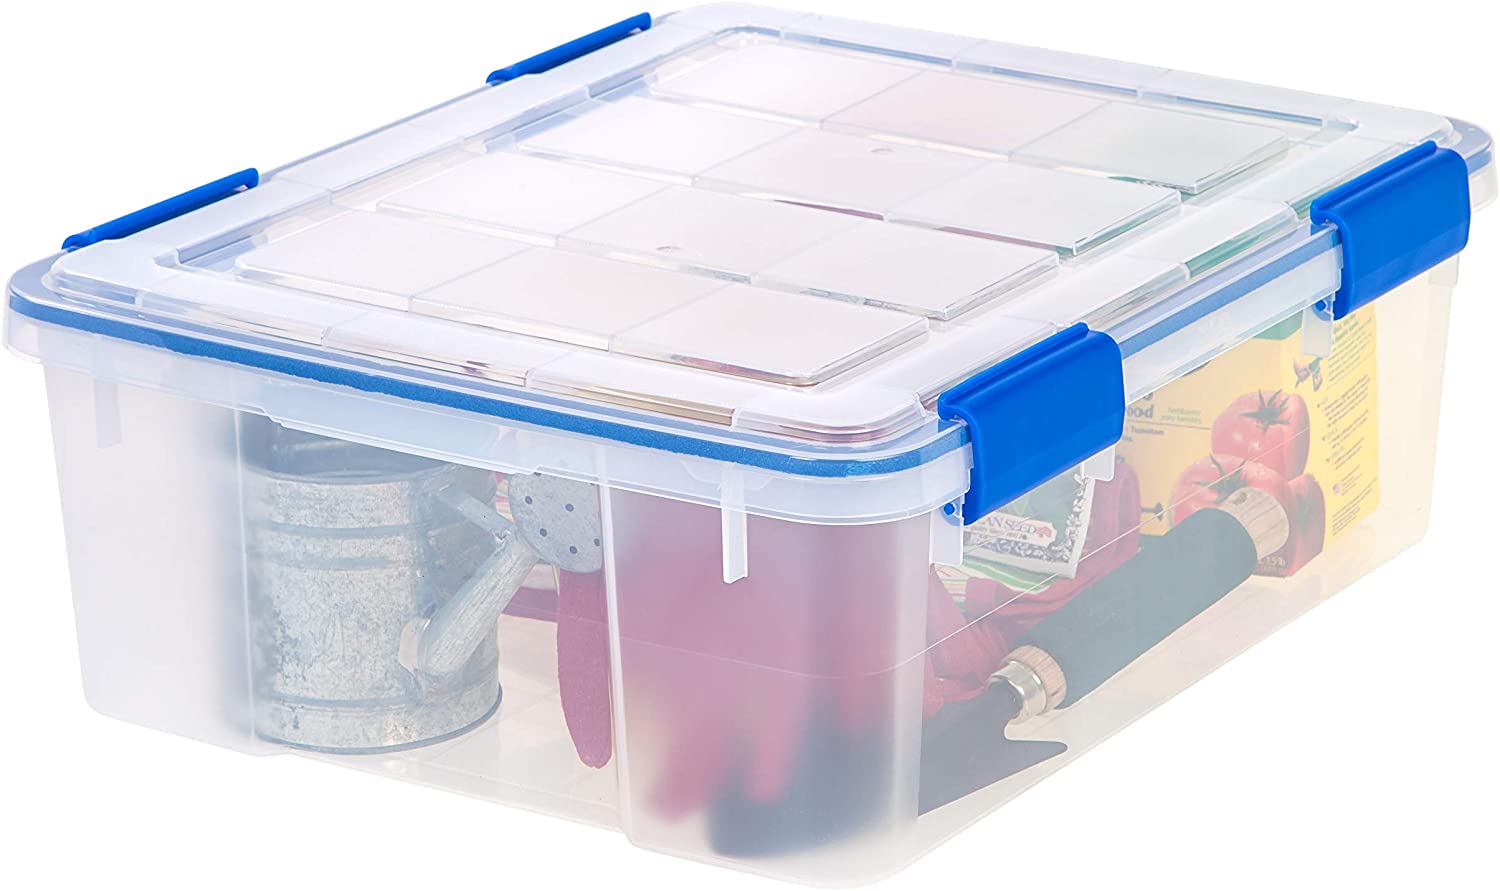 https://bigbigmart.com/wp-content/uploads/2023/06/IRIS-USA-26.5-Quart-WEATHERPRO-Plastic-Storage-Box-with-Durable-Lid-and-Seal-and-Secure-Latching-Buckles-Clear-With-Blue-Buckles-Weathertight-3-Pack9.jpg